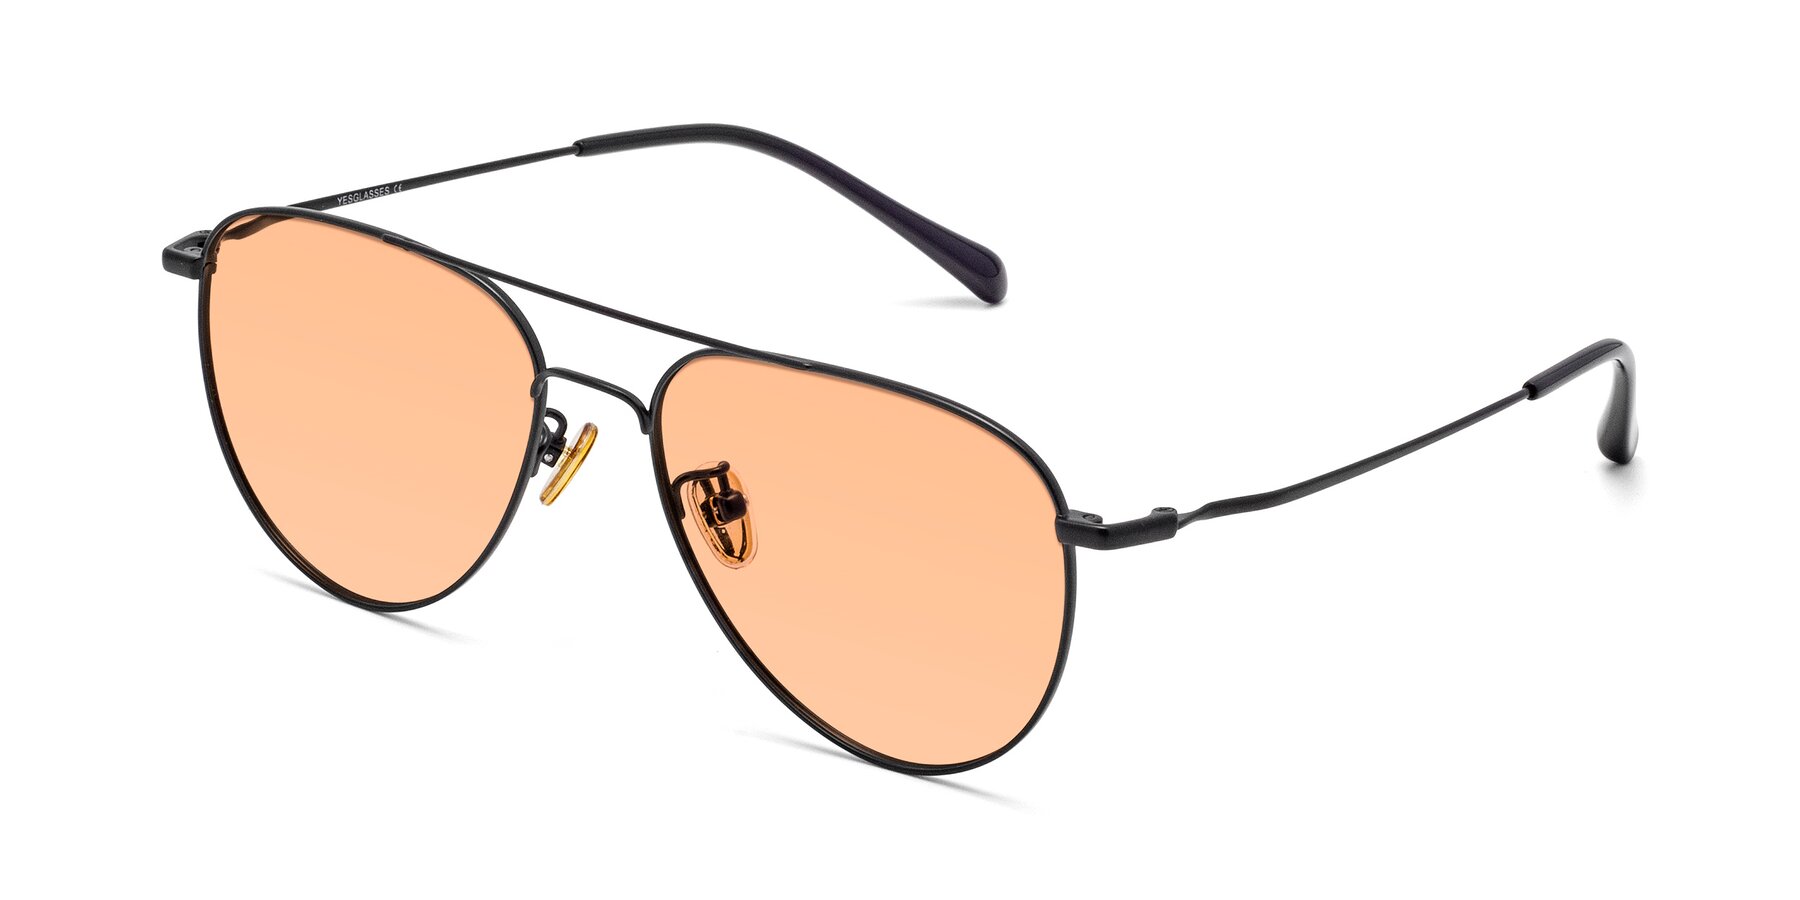 Angle of 80060 in Black with Light Orange Tinted Lenses